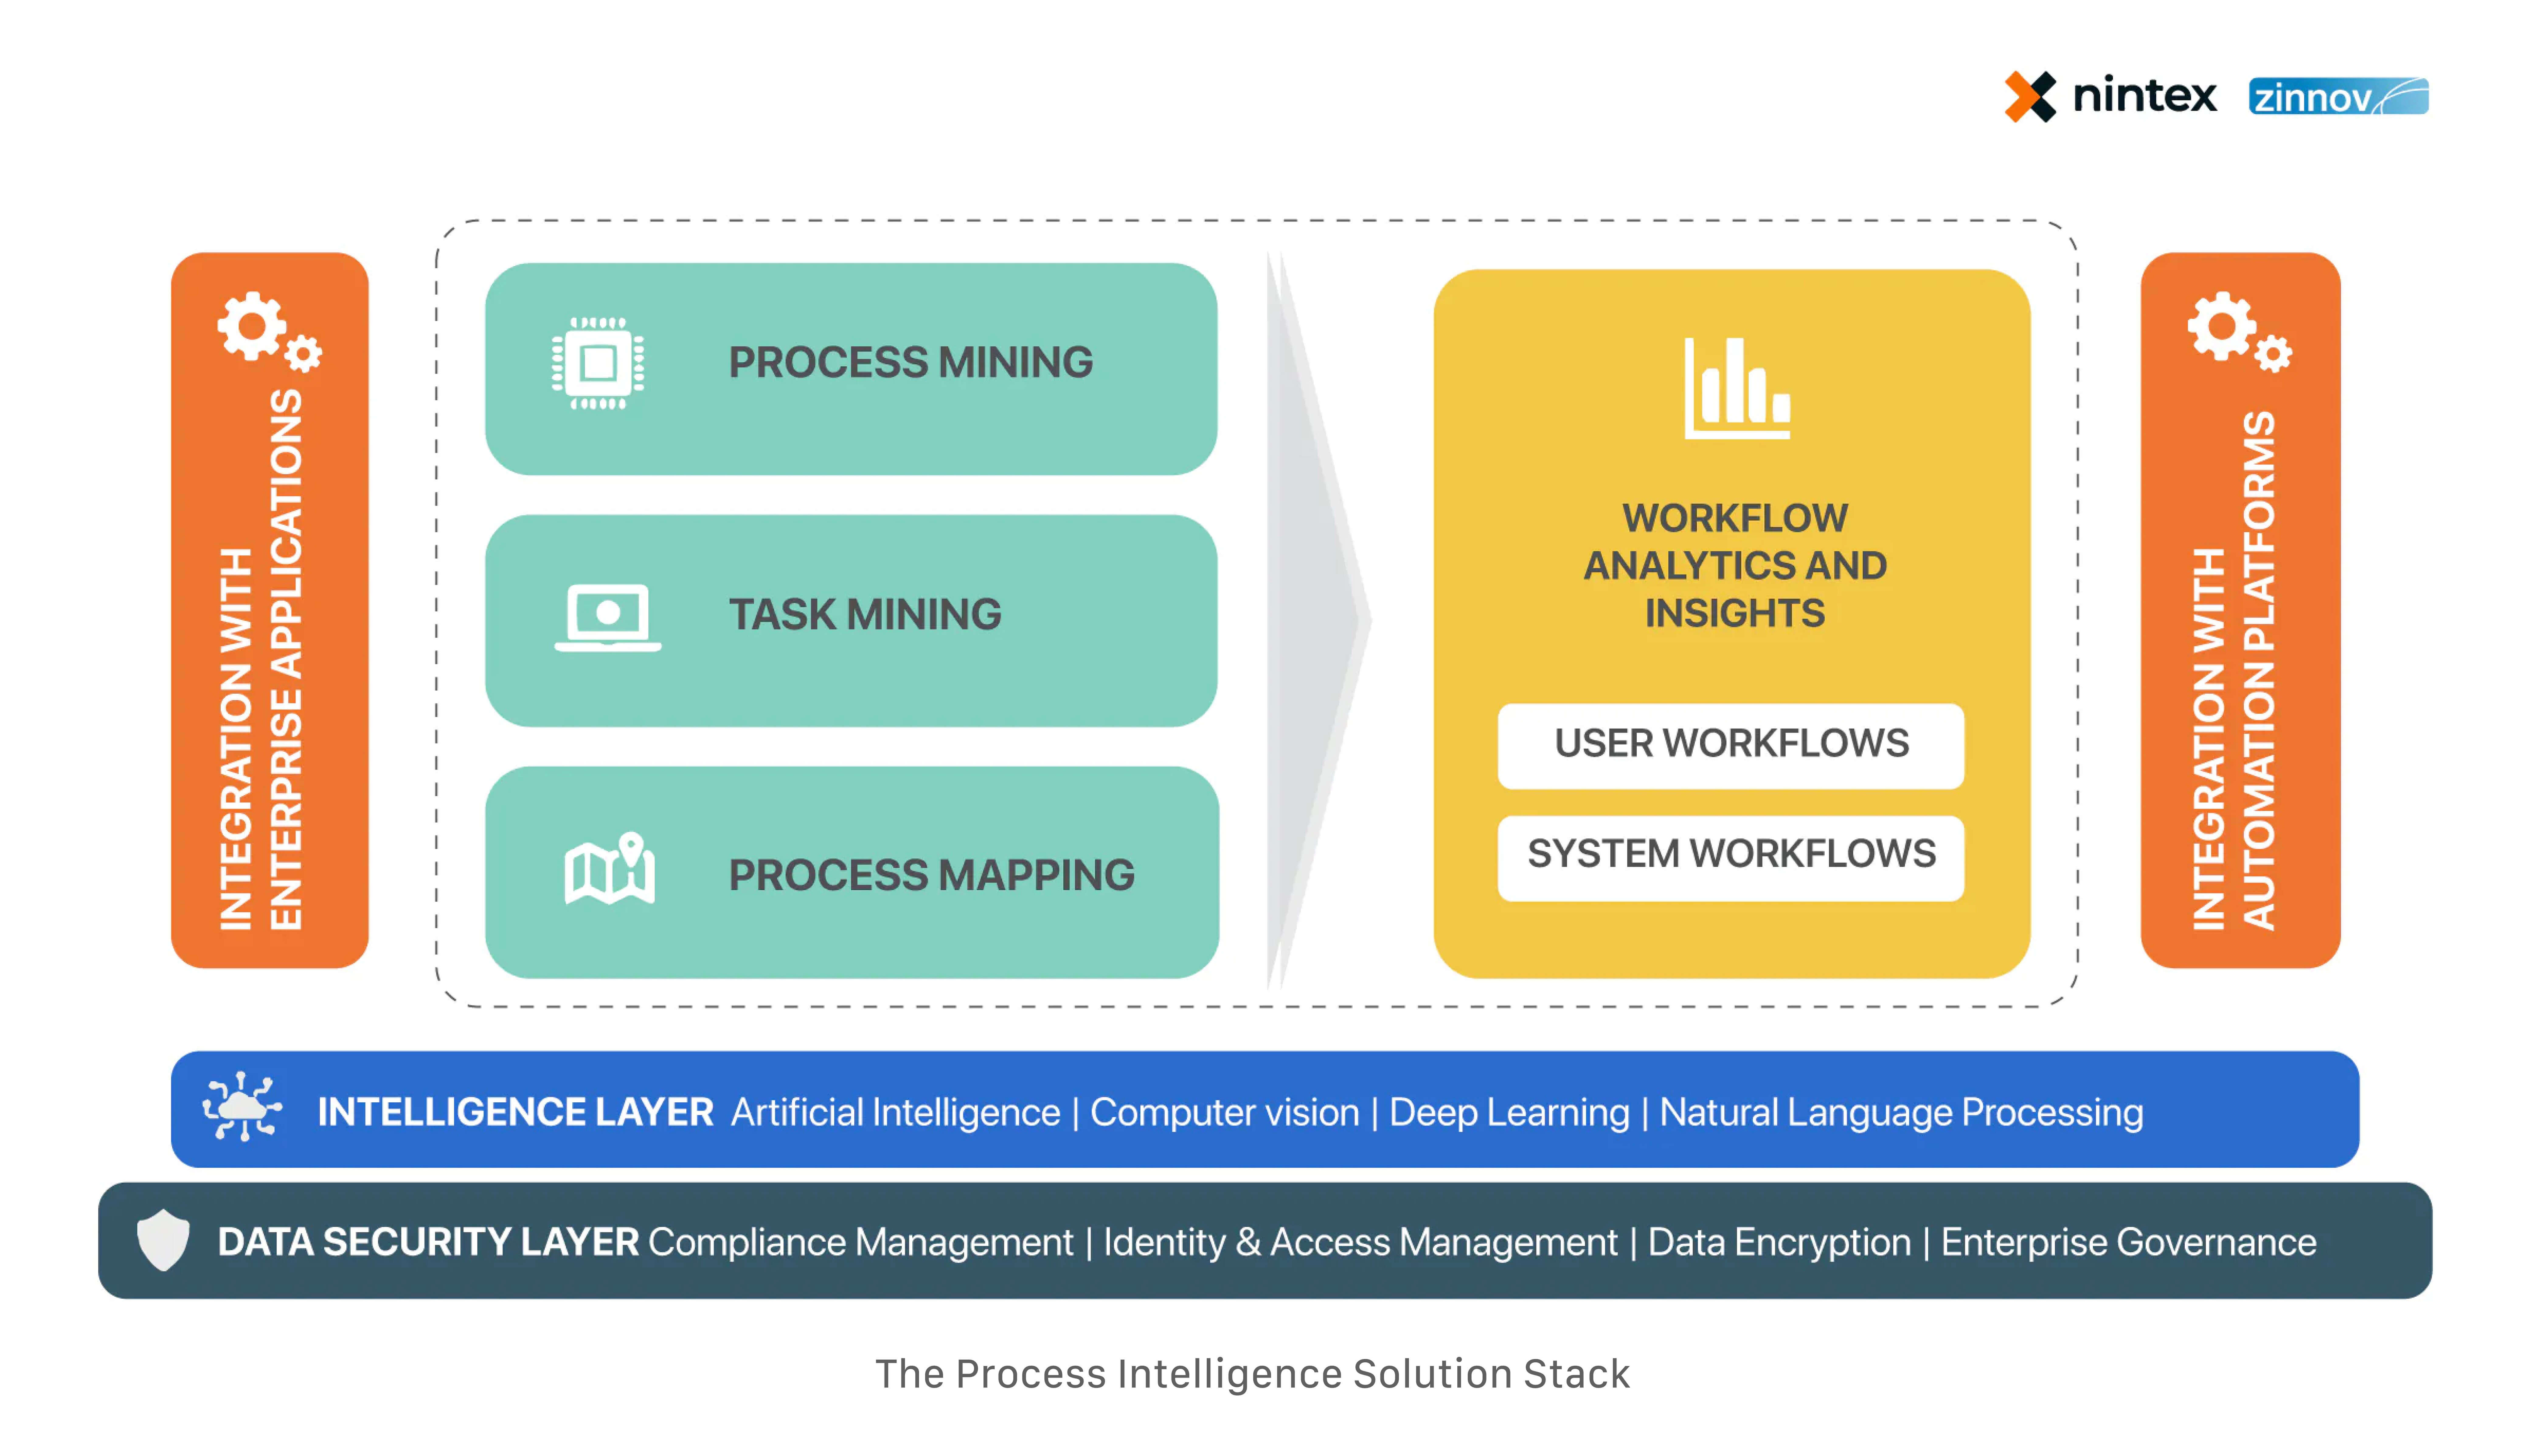 Process Intelligence solution stack